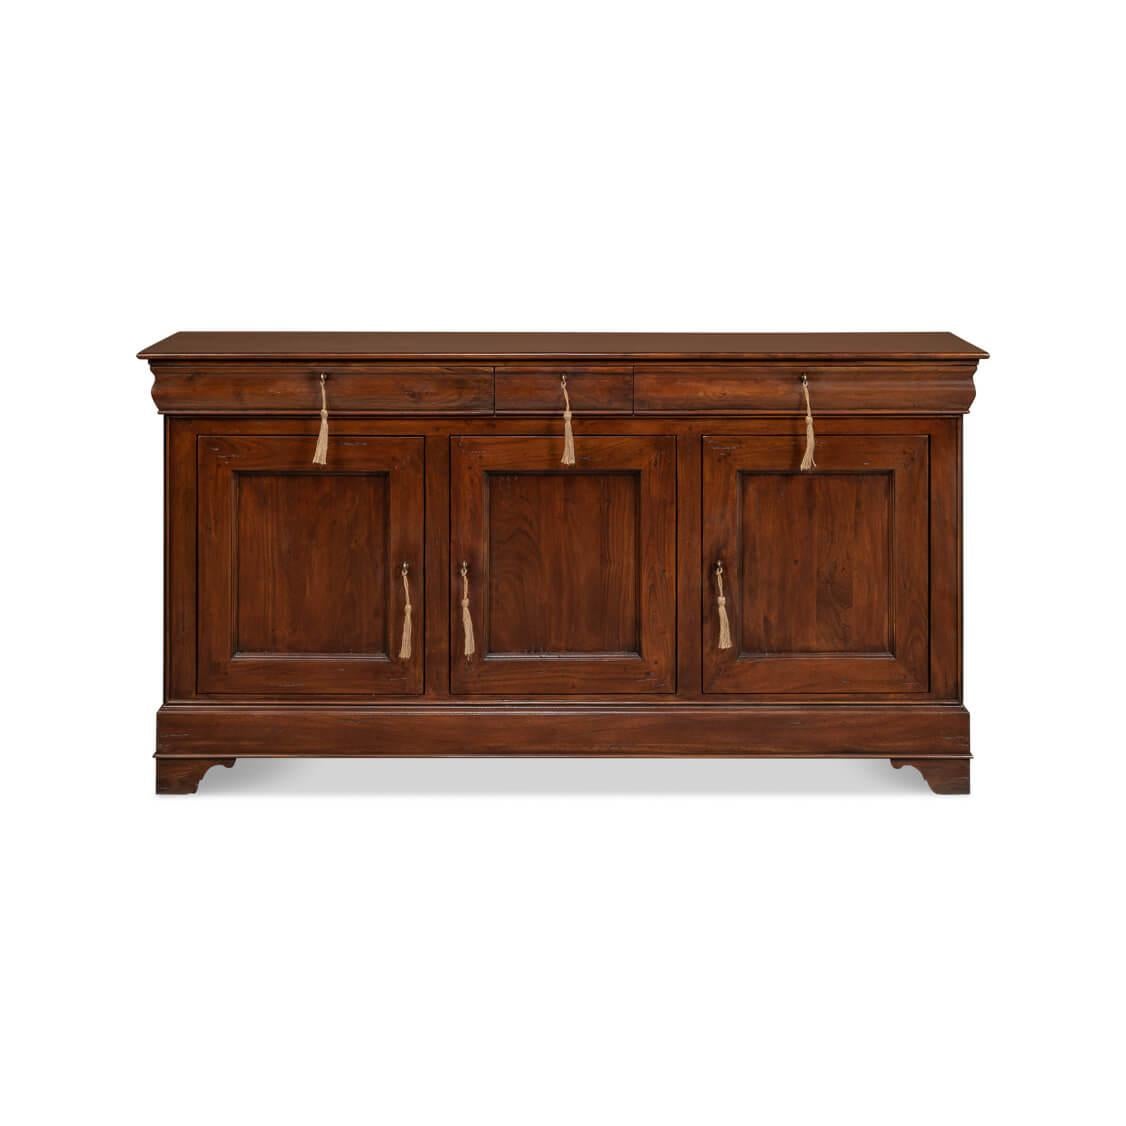 This sideboard is expertly crafted from solid walnut, known for its durability and rich grain, and is finished in a warm brown that highlights its natural beauty. Measuring 70 inches in width, 18 inches in depth, and 36 inches in height, it offers